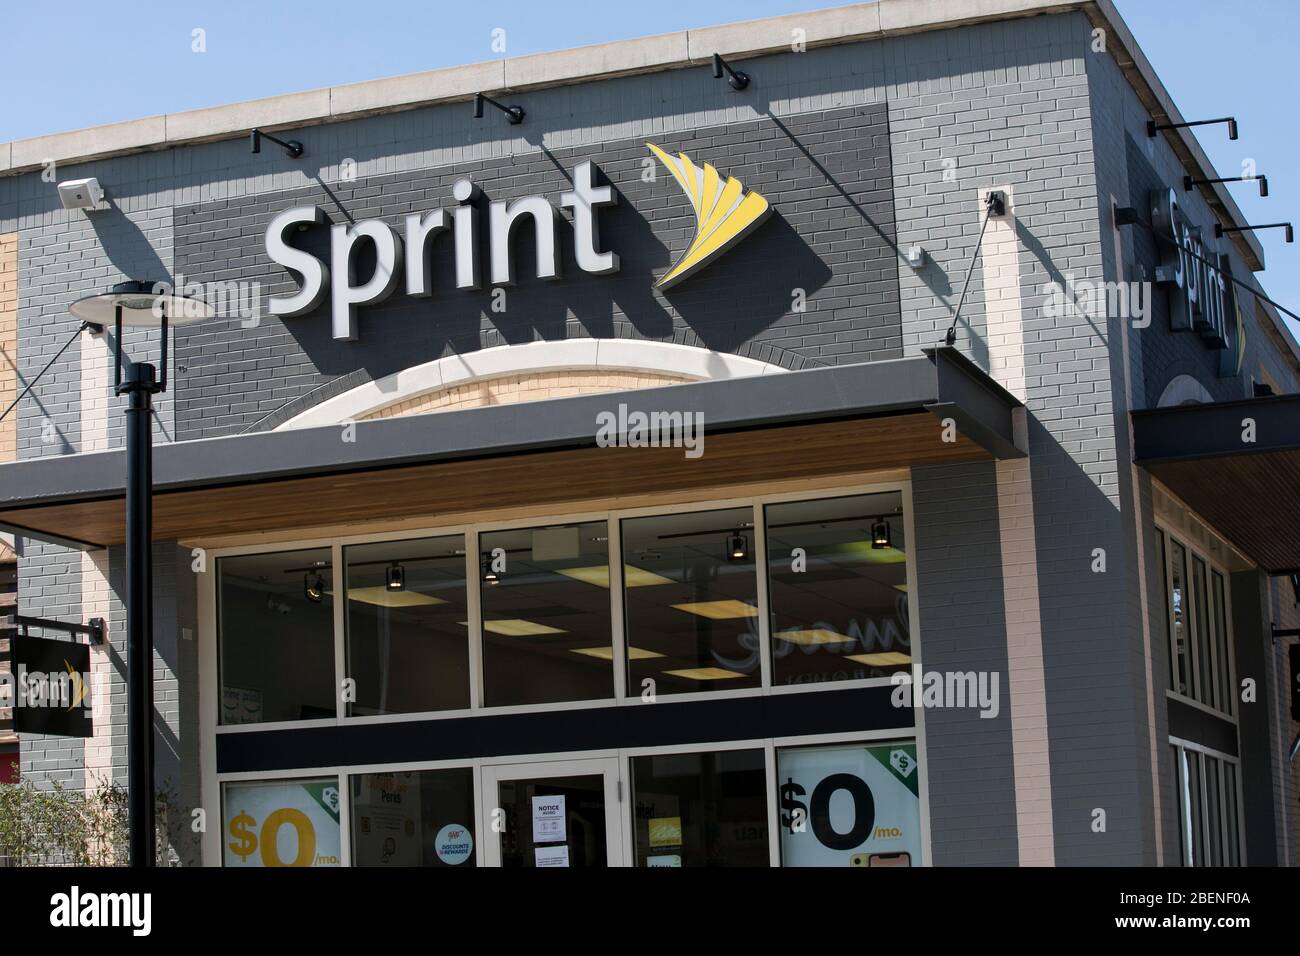 A logo sign outside of a Sprint retail store location in Baltimore, Maryland on April 6, 2020. Stock Photo